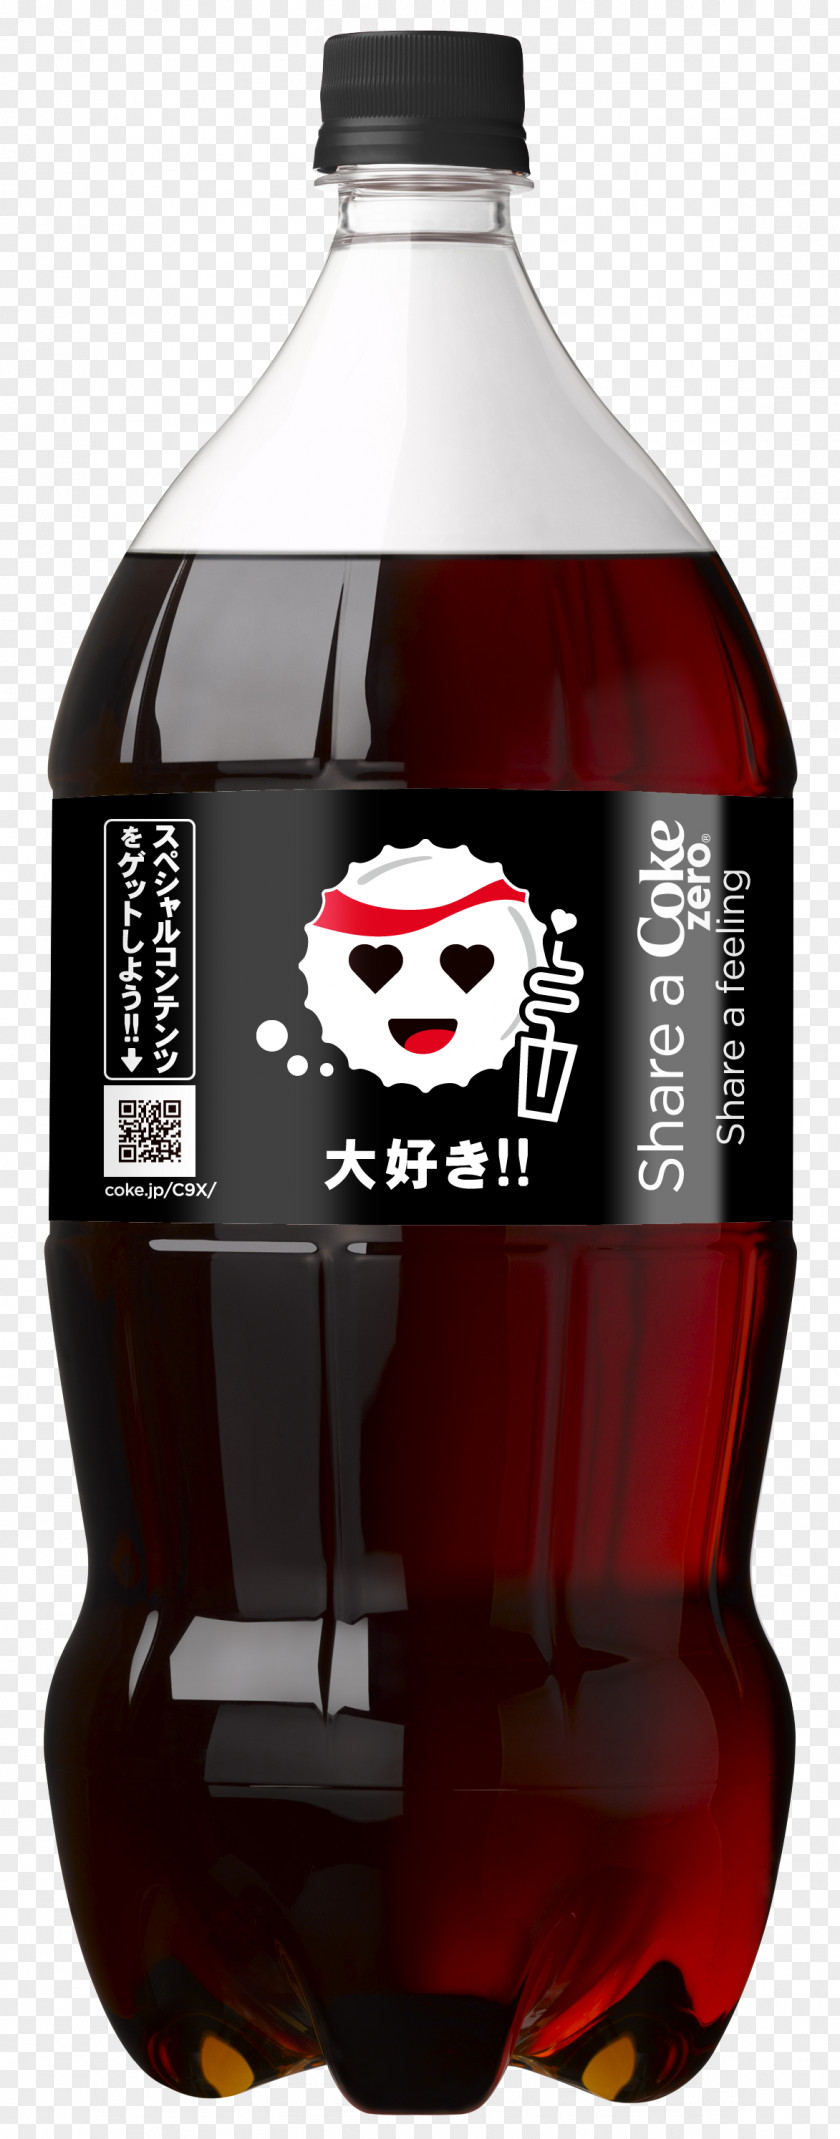 News Center Coca-Cola Fizzy Drinks Bottle Carbonated Water PNG